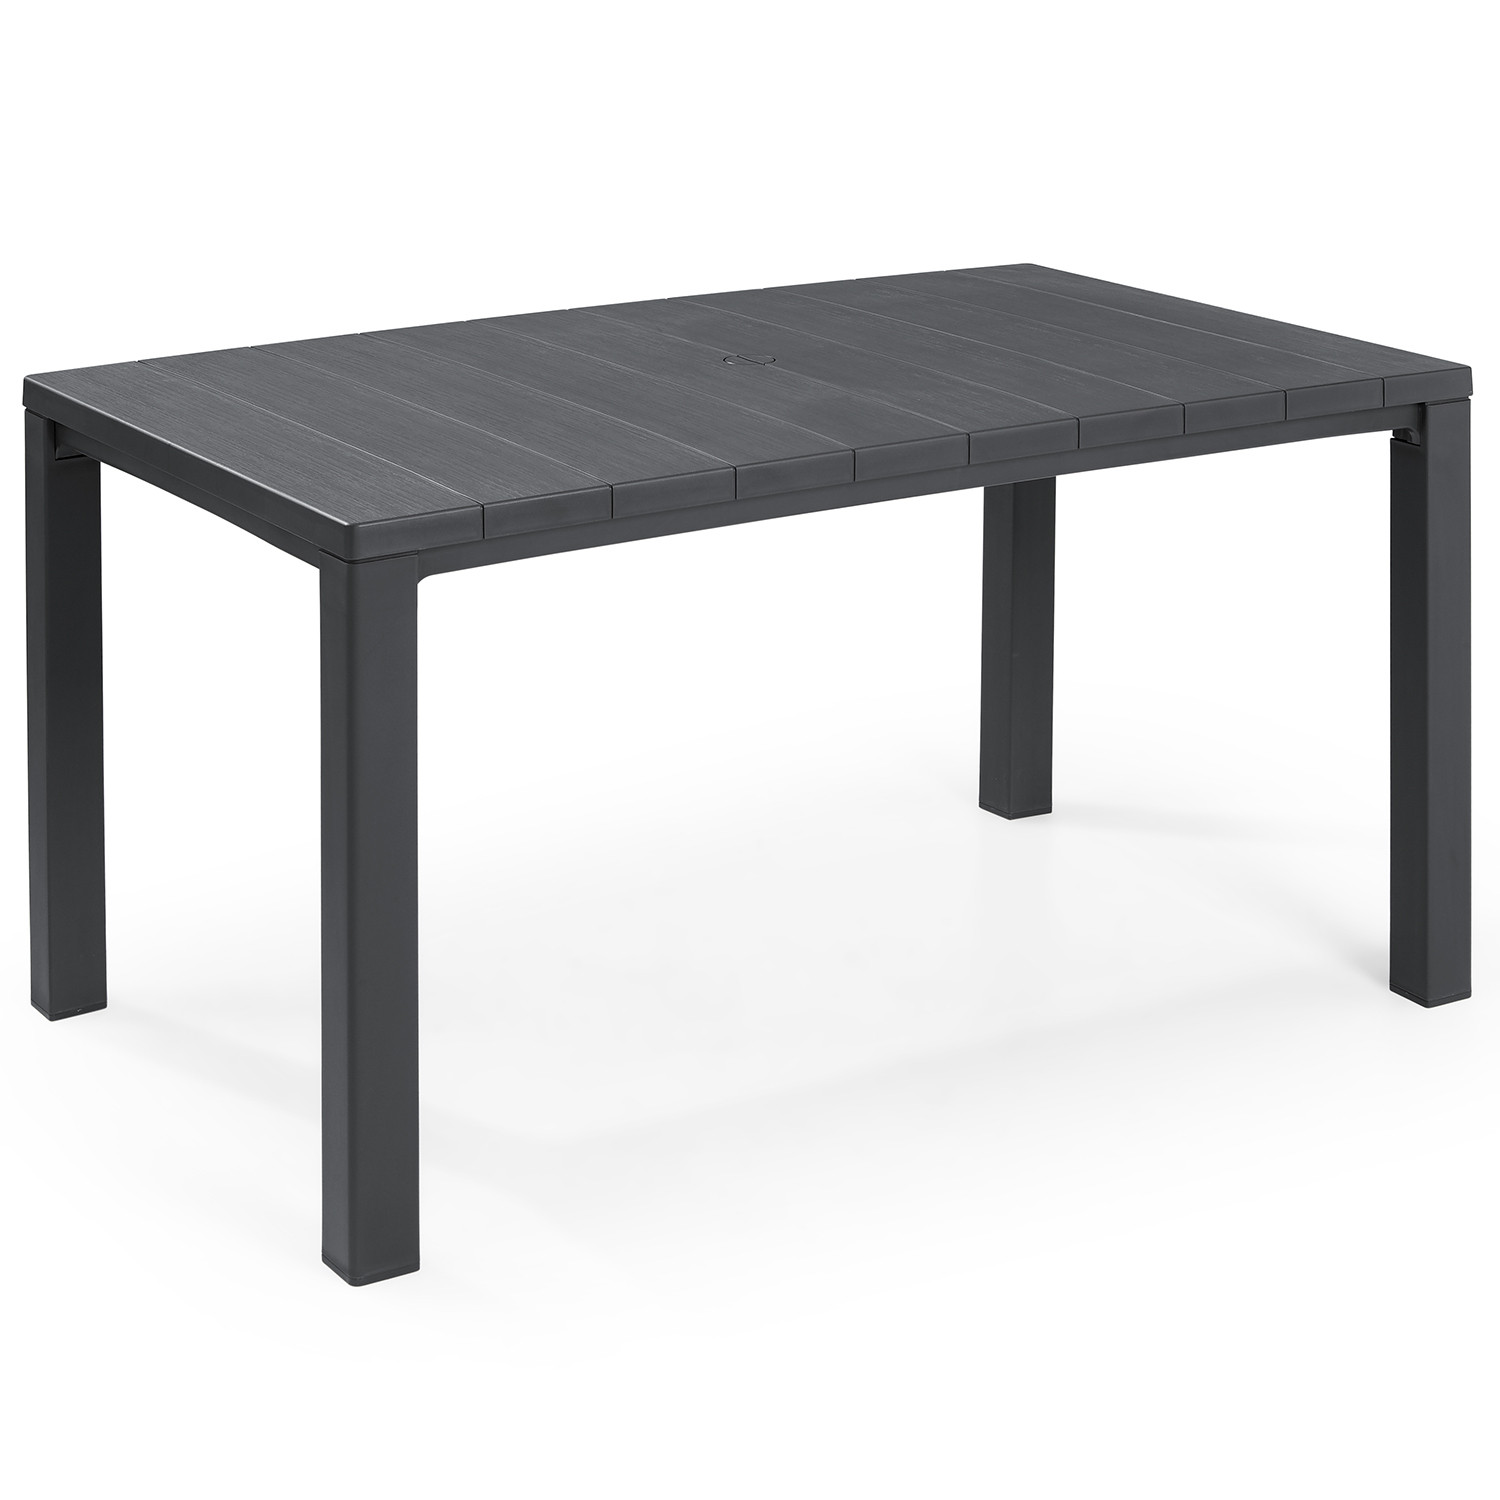 Keter Julie 6 Seater Patio Table Graphite Image 2